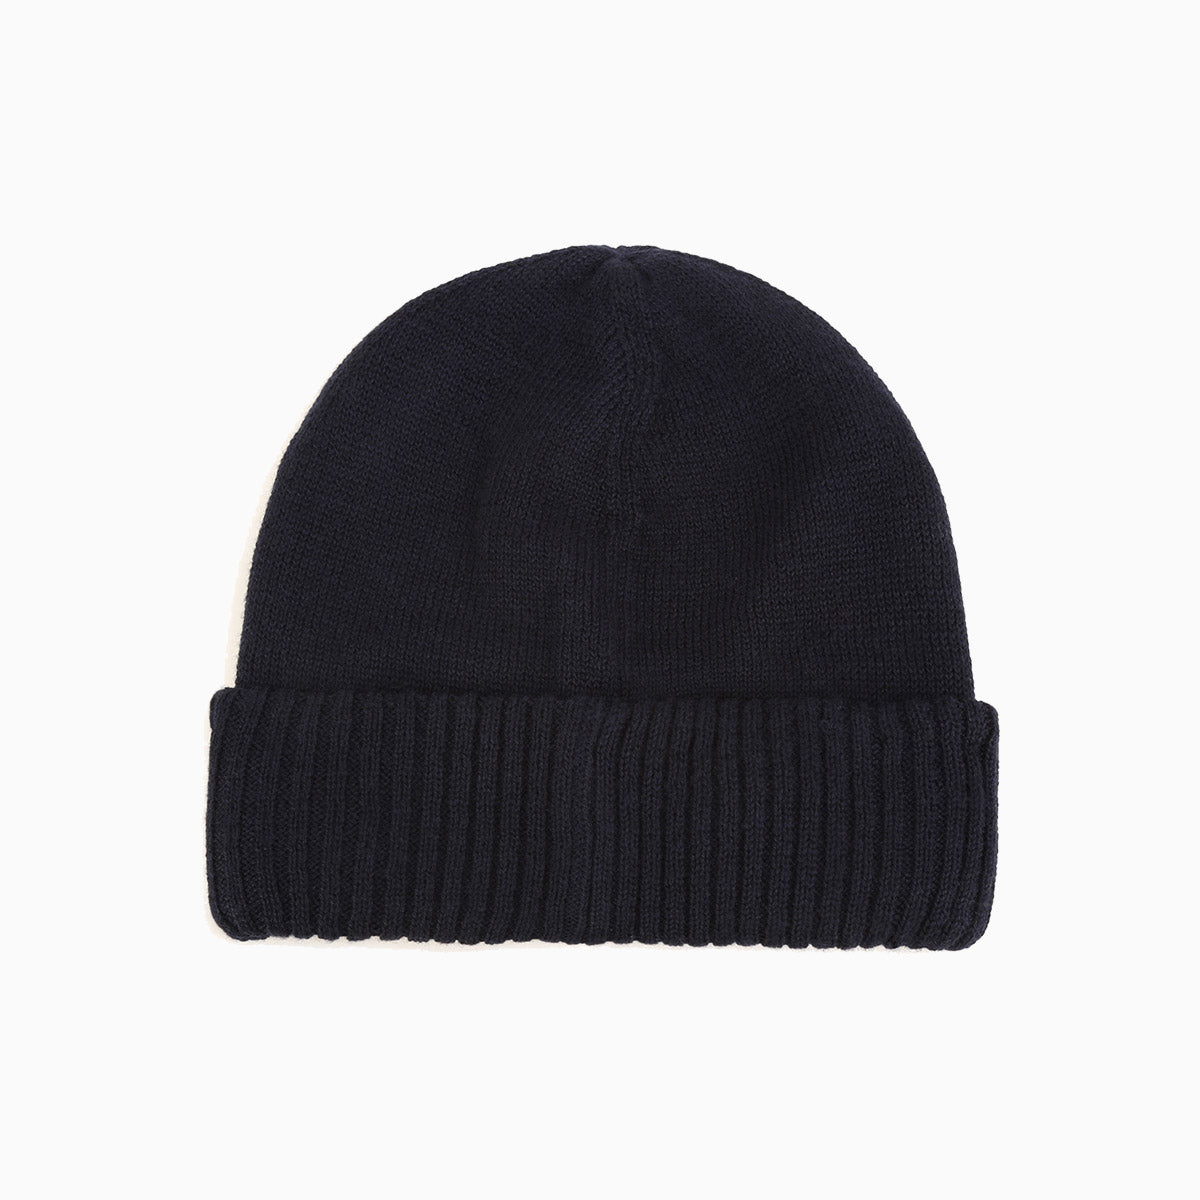 Kid's Pull On Knitted Beanie Hat